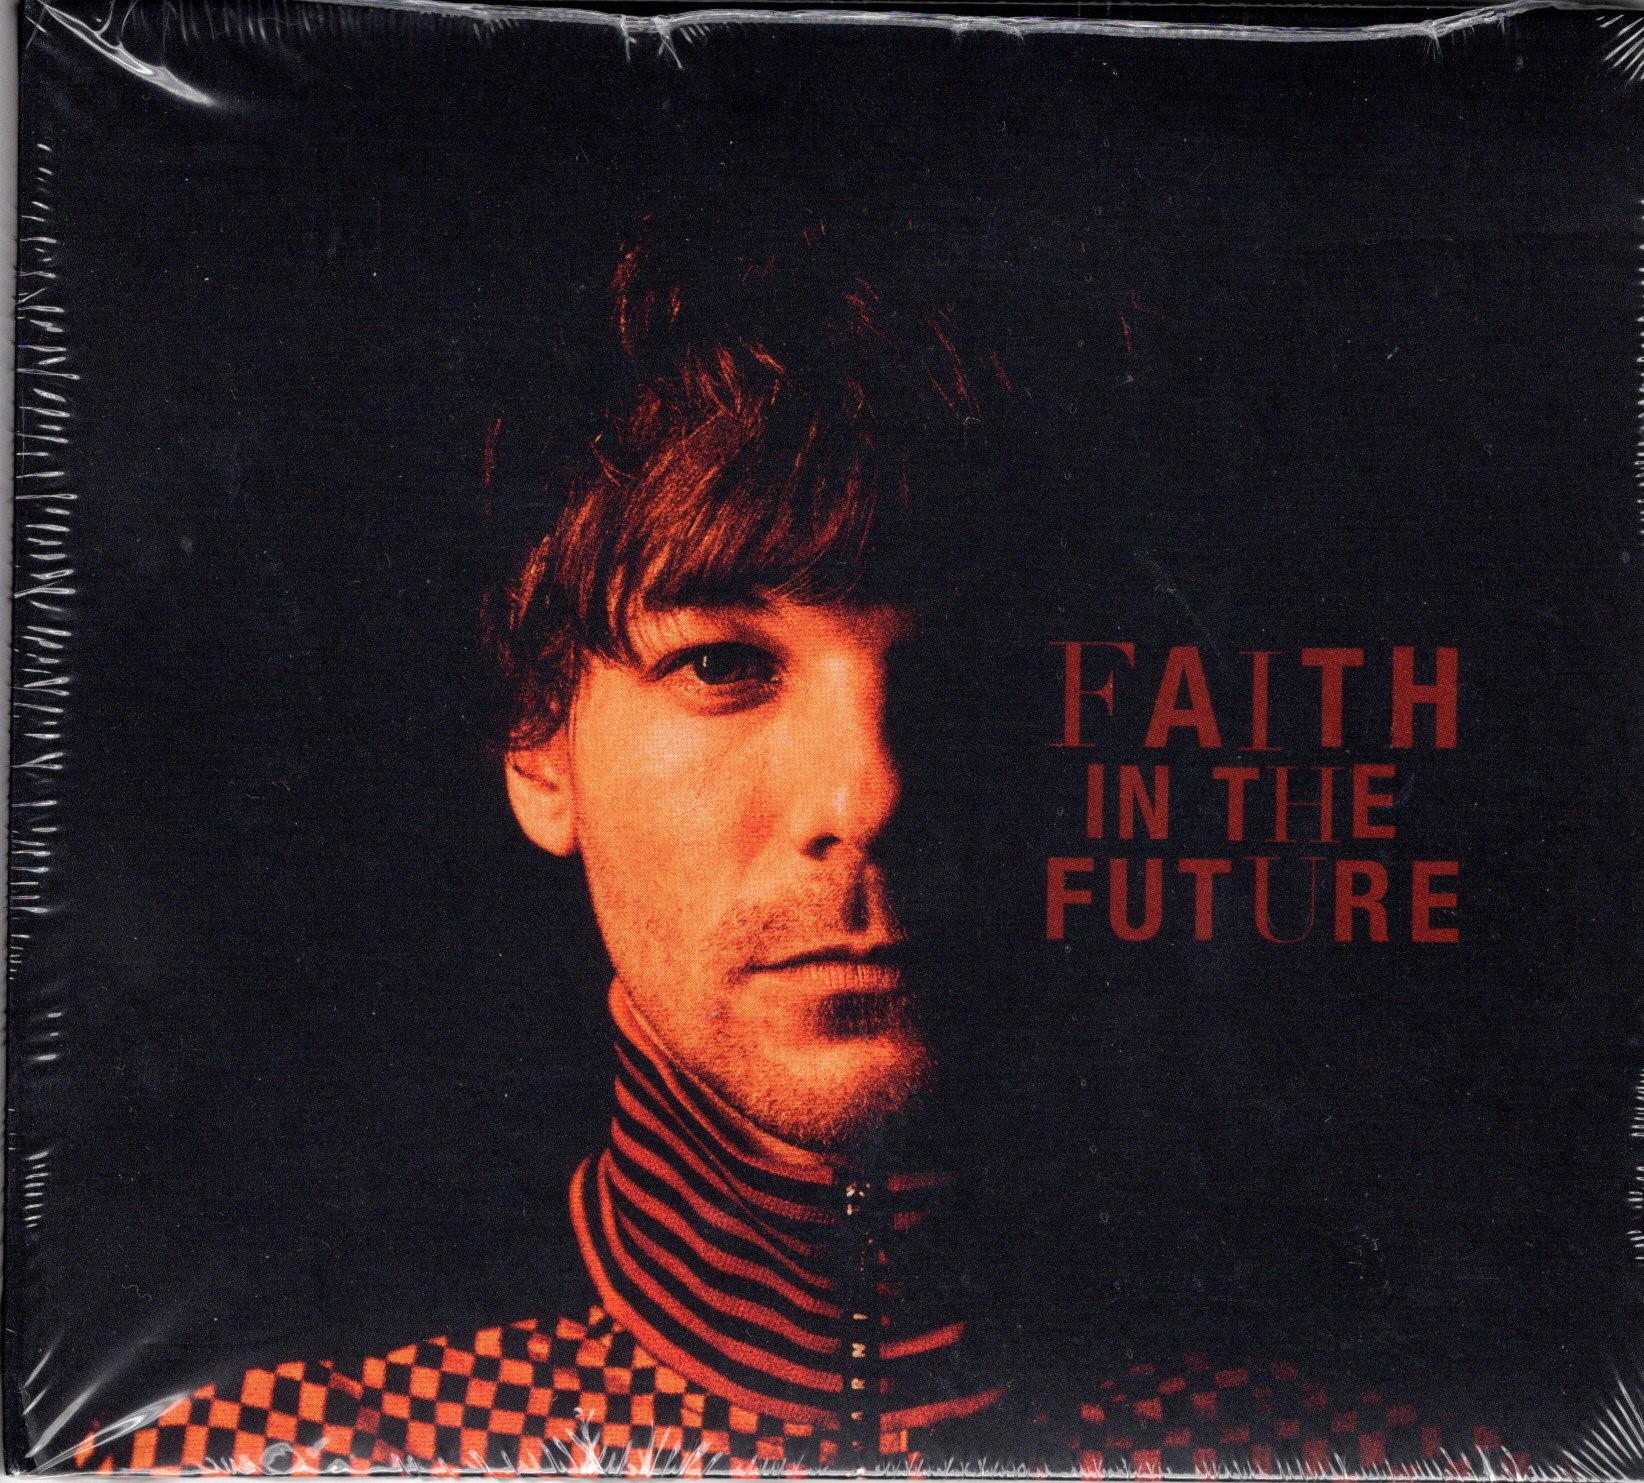 Louis Tomlinson – Album (CD) with Signed Card – Faith in the